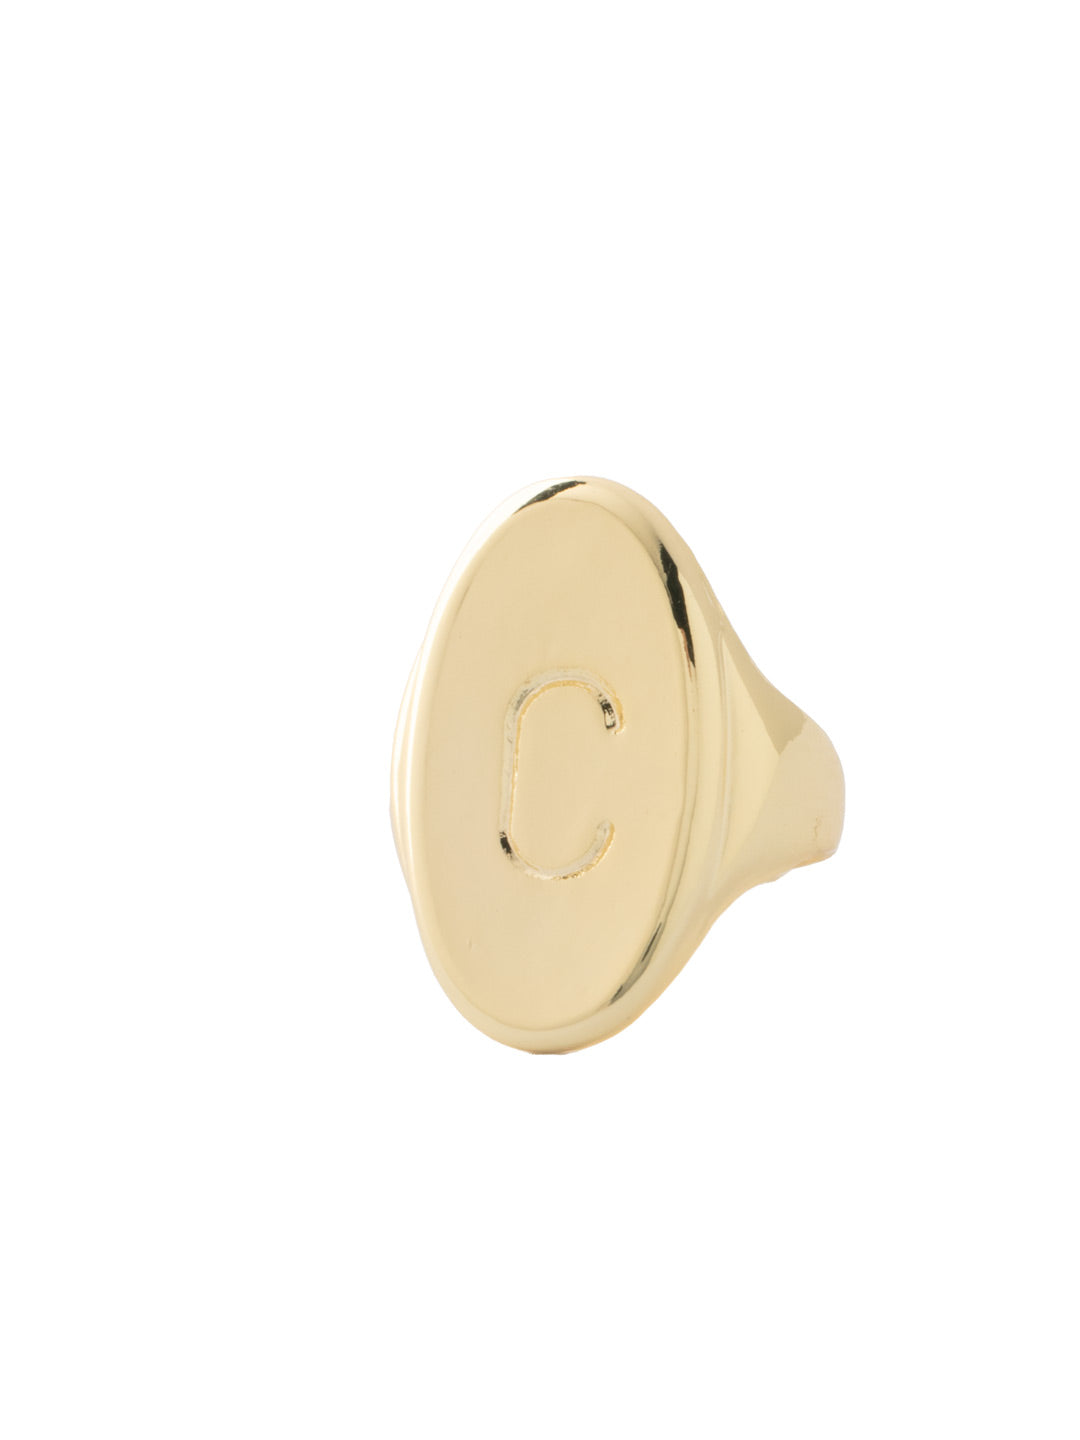 "C" Signet Statement Ring - RFK32BGMTL - <p>The Signet Statement Ring features a capital letter stamped into an oblong metal disk on an adjustable ring band. From Sorrelli's Bare Metallic collection in our Bright Gold-tone finish.</p>